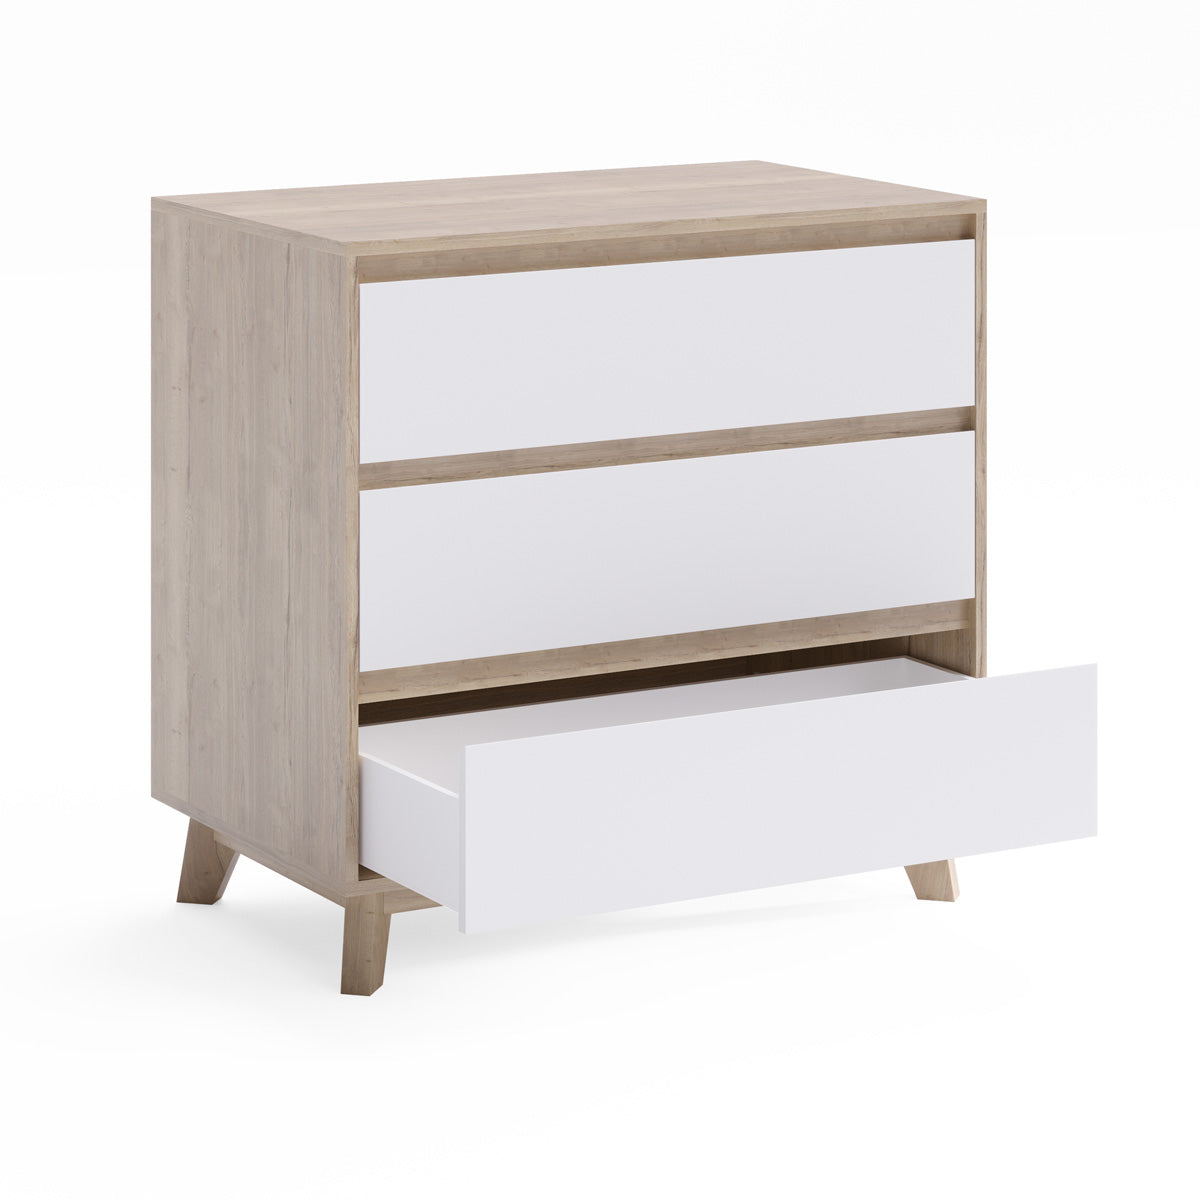 Three Drawer Wooden Bedroom Chest of Drawers (Kinfolk Collection)